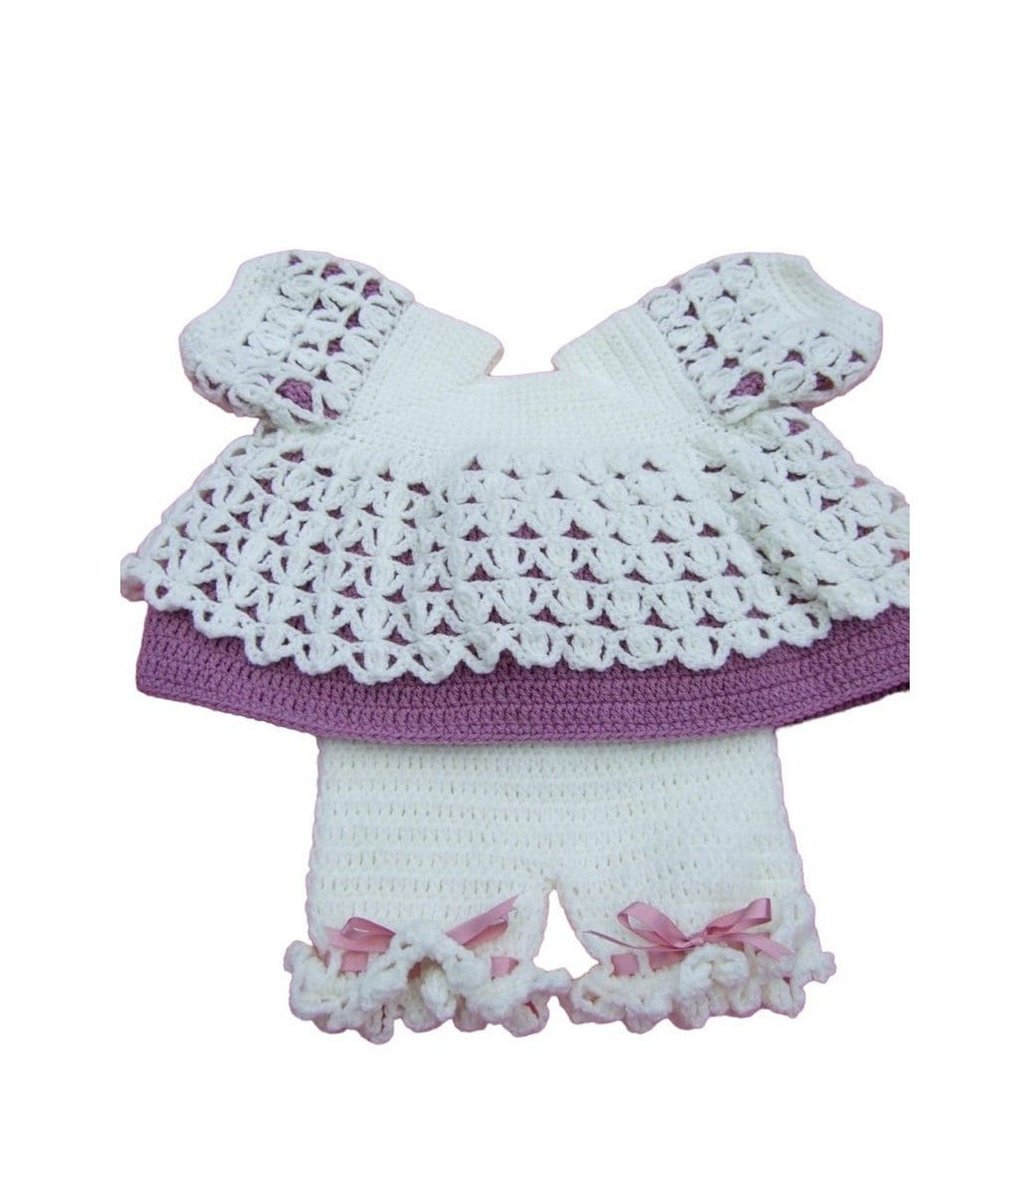 Check out this adorable hand crochet baby angel top and shorts perfect for 0-3 months! 🧶👶🏻 Made with love and care, this handmade outfit is a must-have for your baby girl. Get yours now on #Etsy! knittingtopia.etsy.com/listing/170957… #knittingtopia #handmade #tweetuk #MHHSBD #craftbizparty